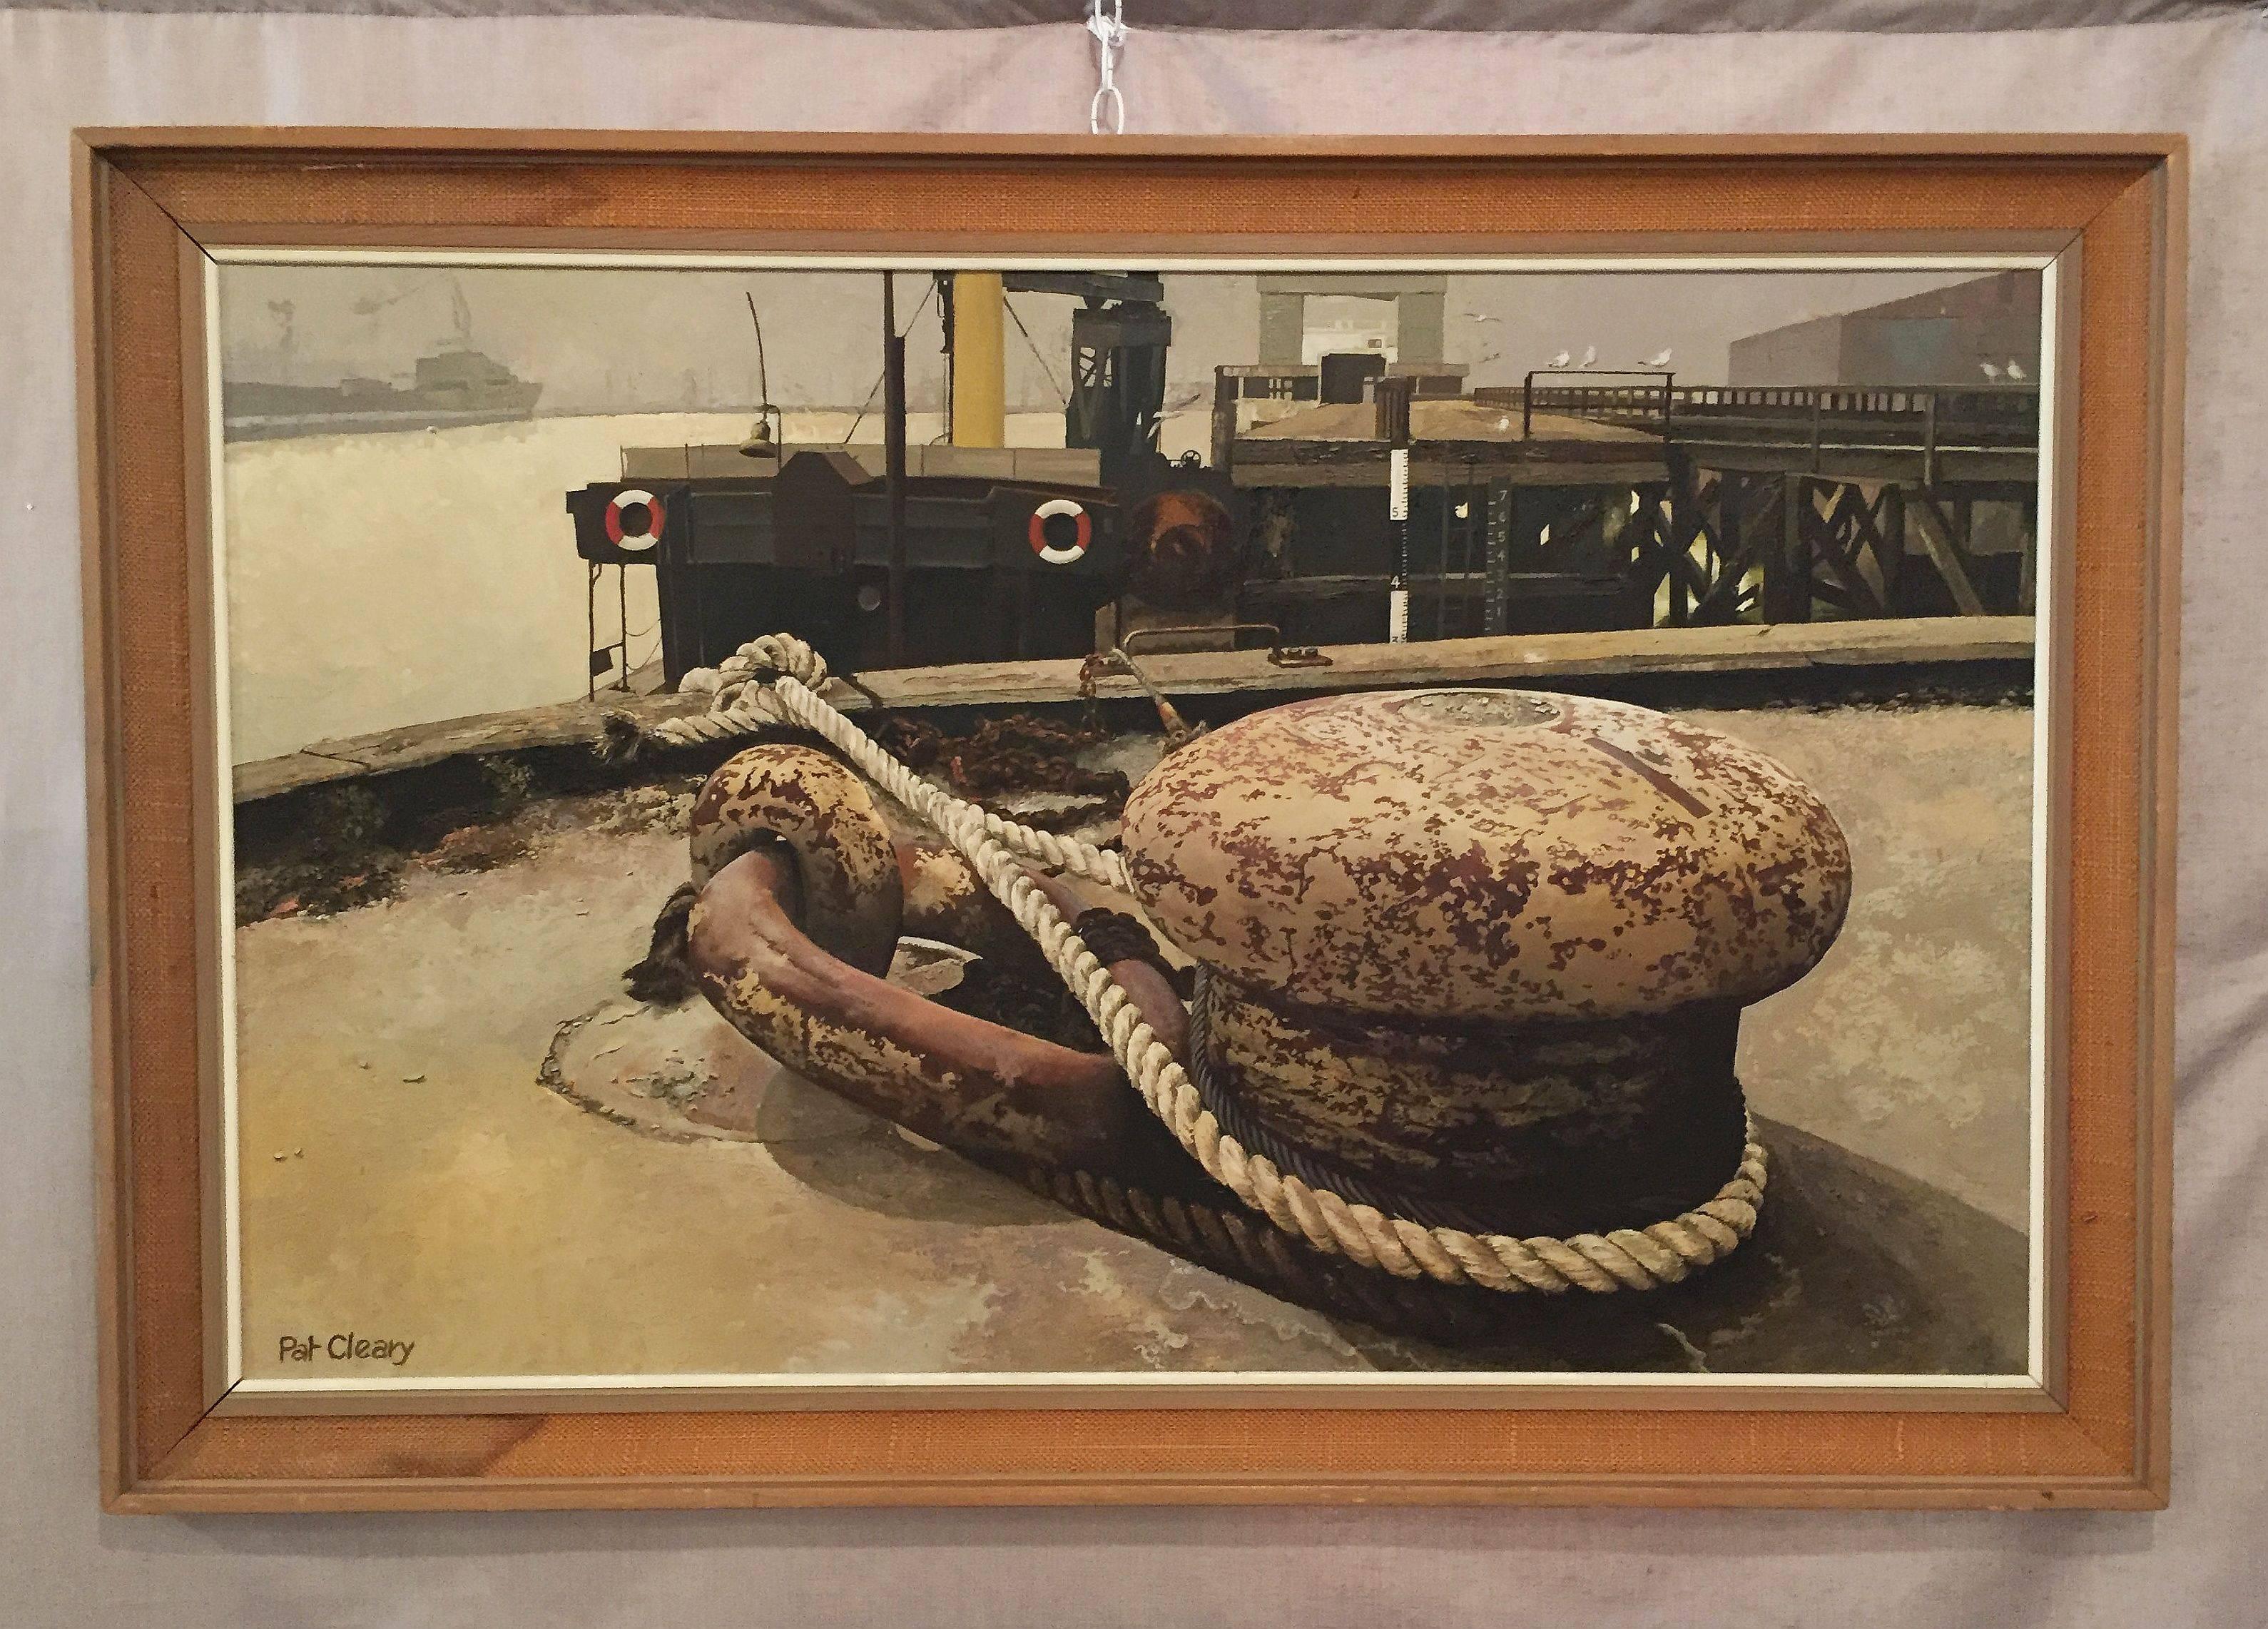 A fine large English oil painting on board, circa 1978, by Pat Cleary, depicting a mooring bollard and ship in a harbour or dock, mounted in a stylish rectangular wood and canvas frame.

Titled: Sunday Morning

Dimensions are H 31 inches x W 47